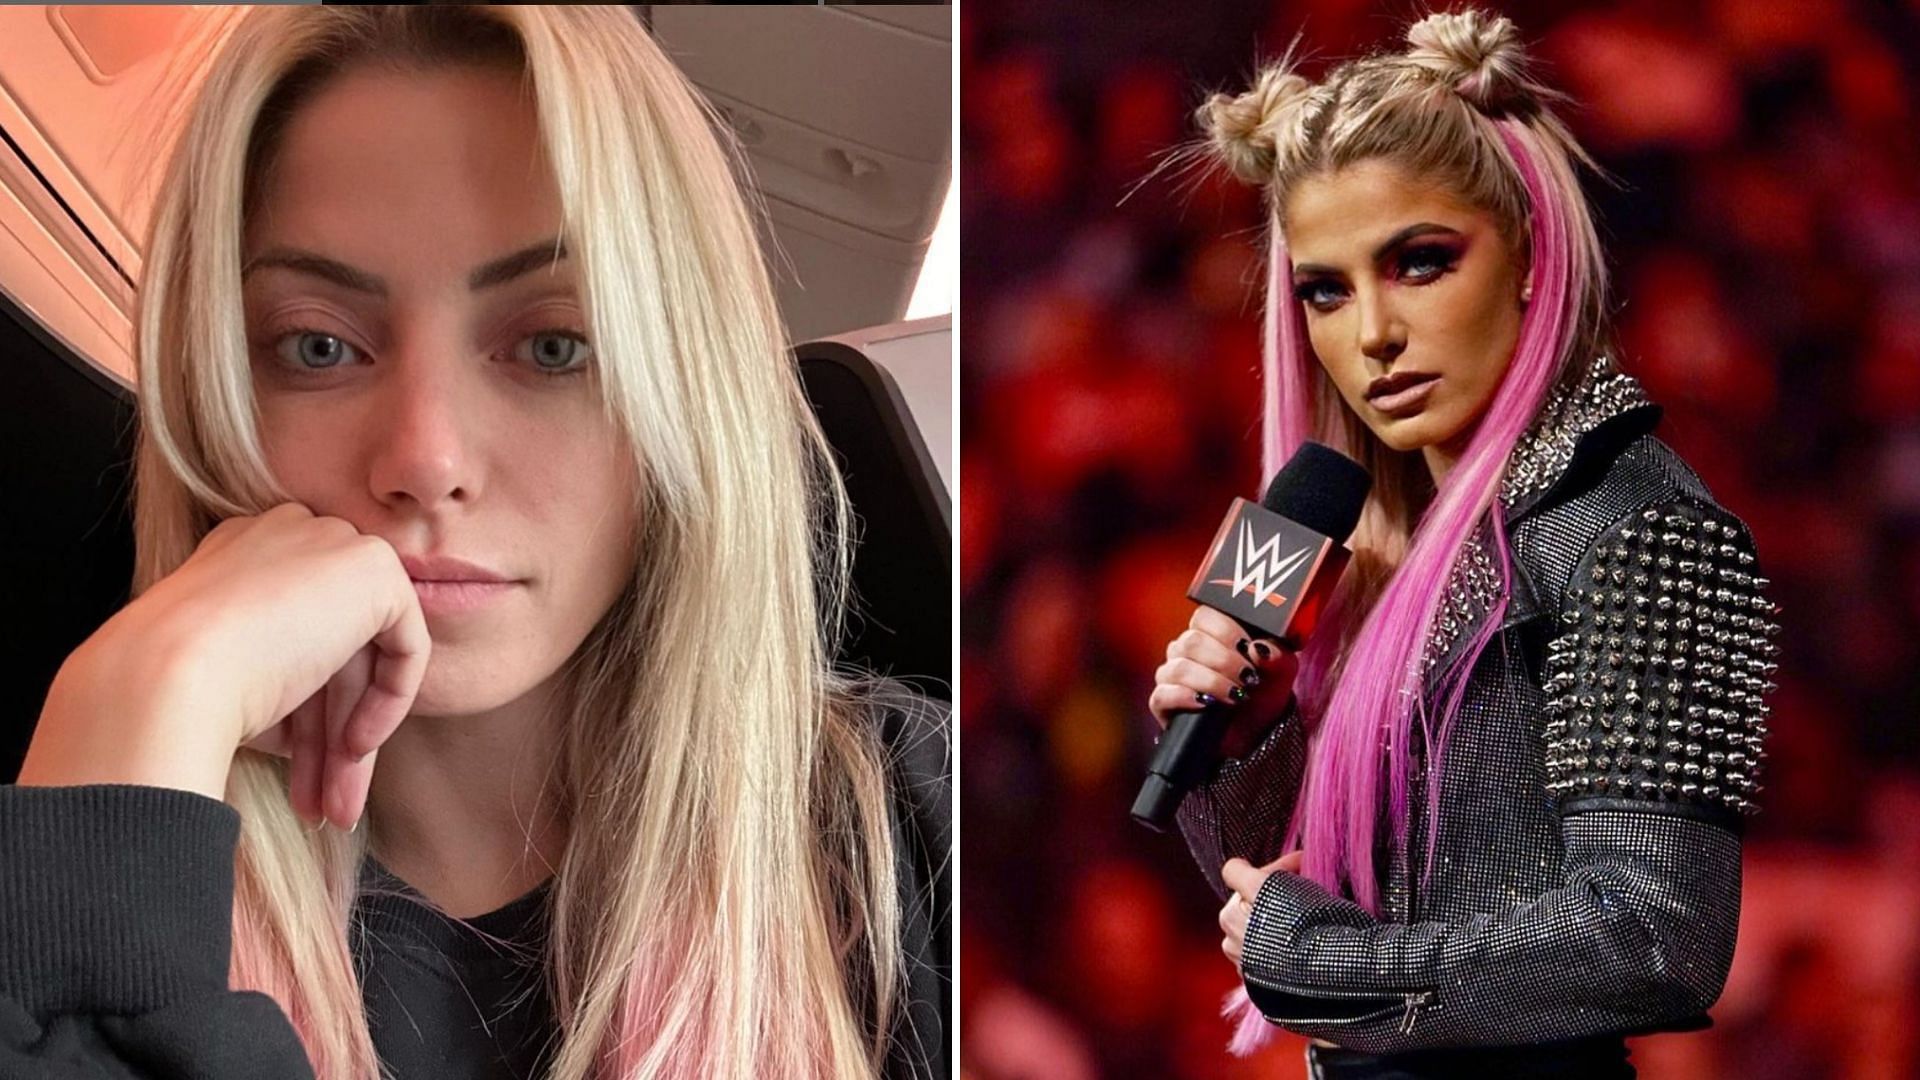 Bliss has been off TV for over a year.